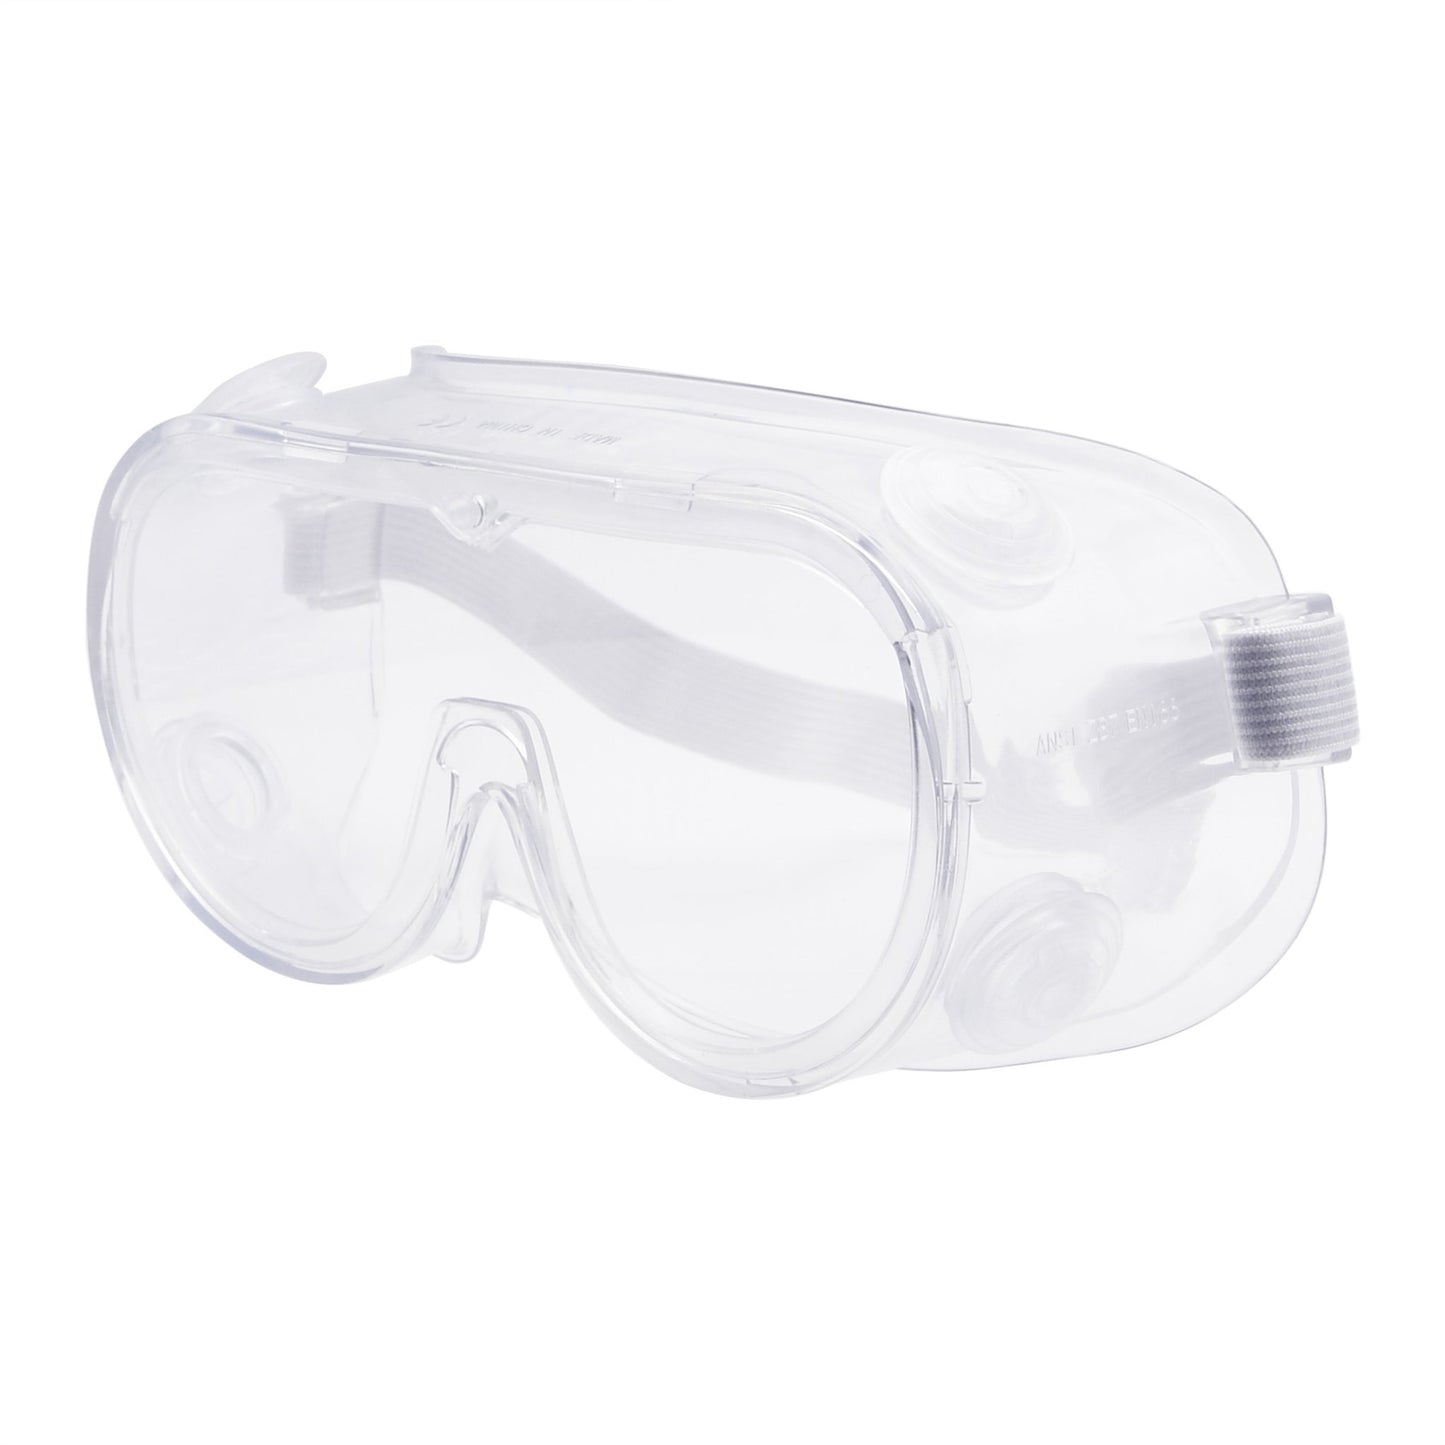 Safety Goggles Wrap Around Eyewear with Anti-Fog Crystal Clear Lens and Adjustable Elastic Strap